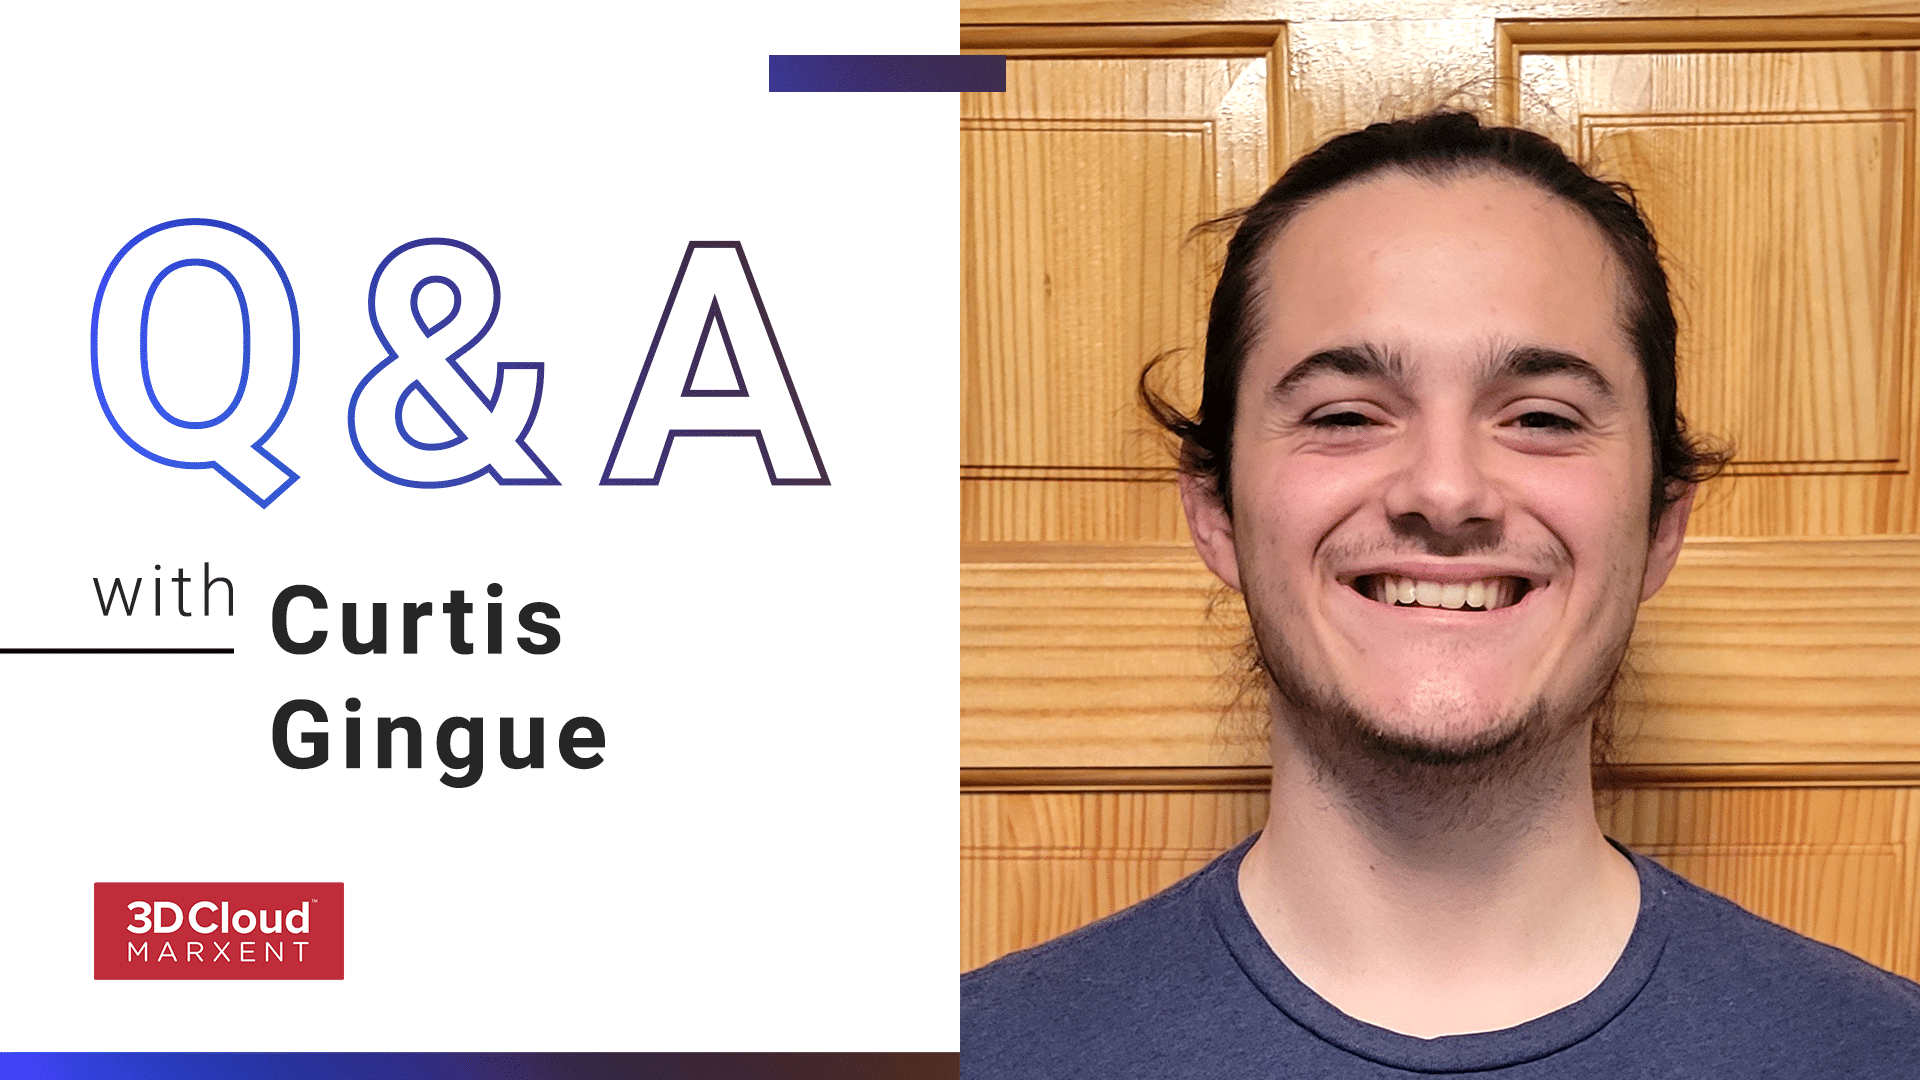 Employee Q&A with Curtis Gingue